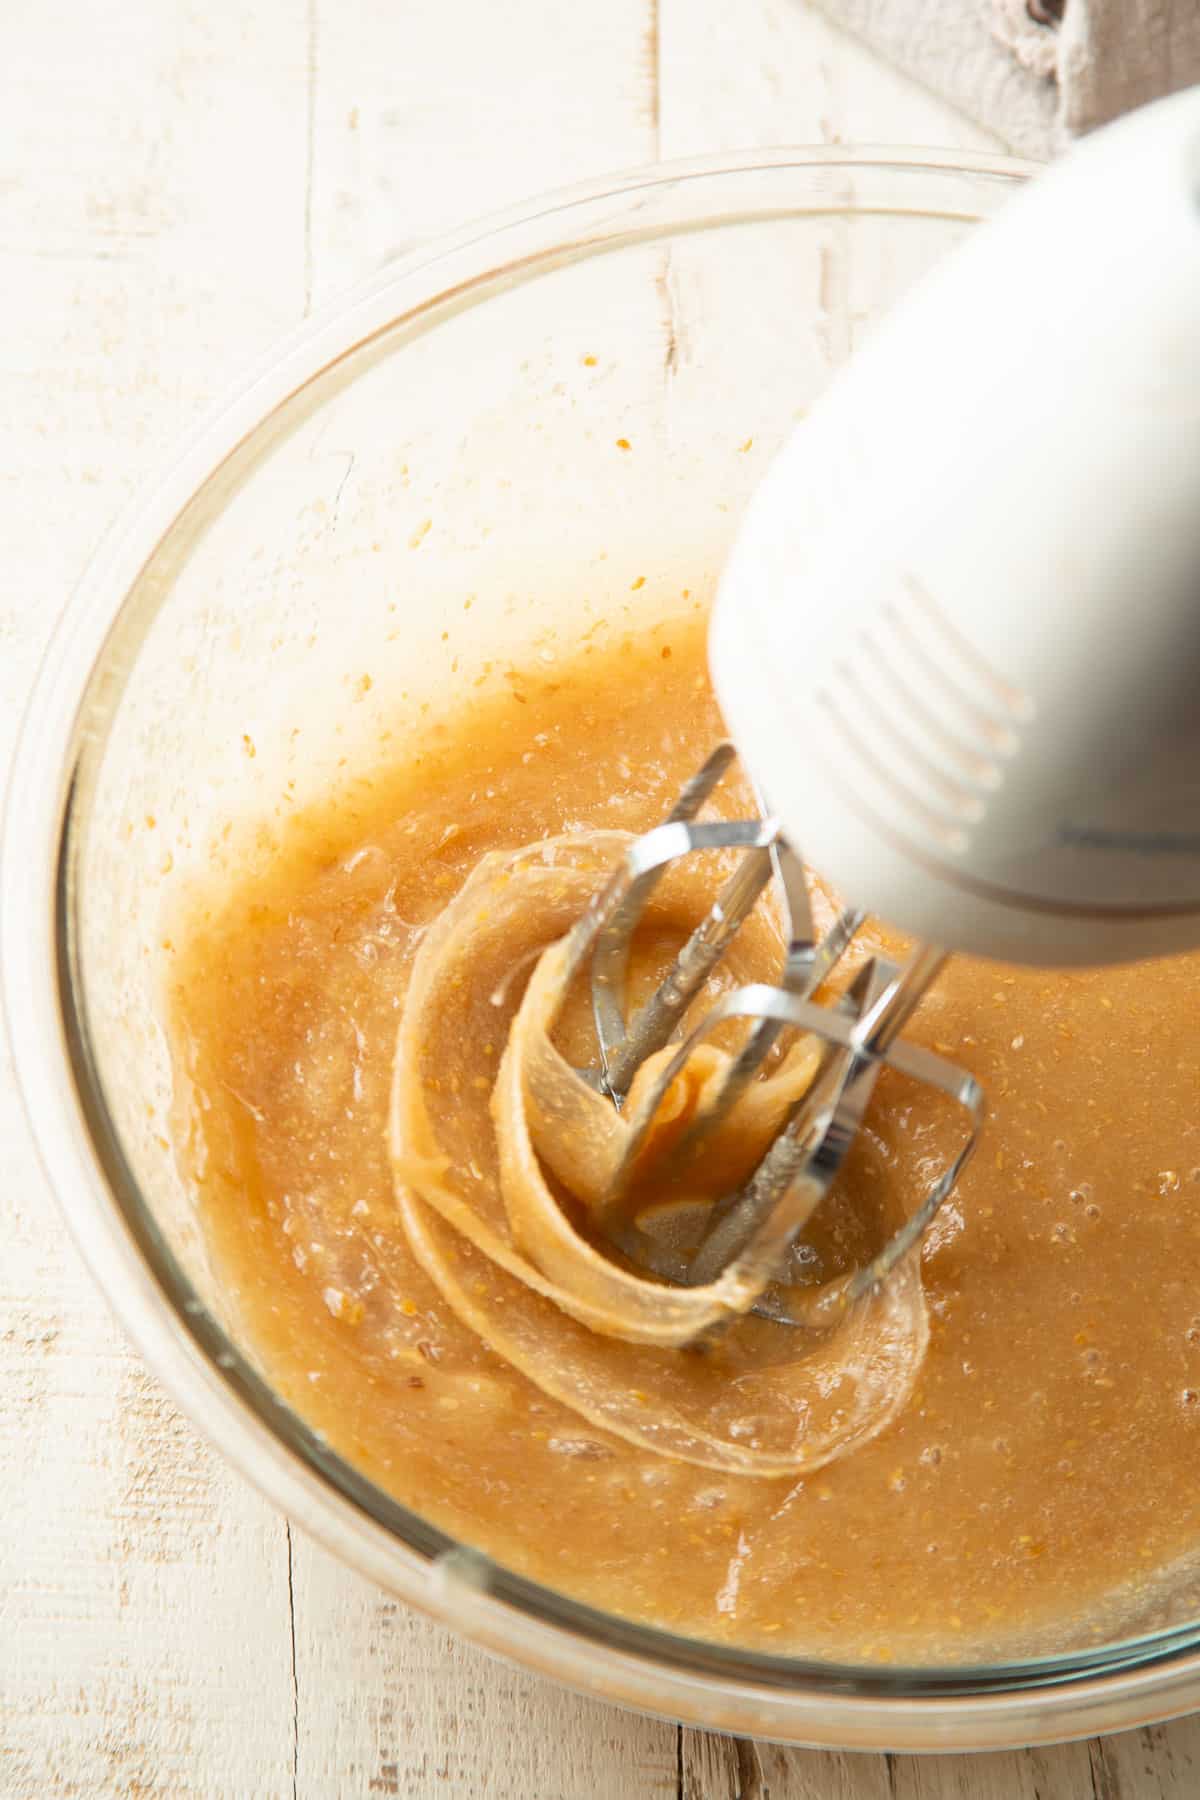 Flax egg and sugar begin whipped in a bowl with an electric mixer.